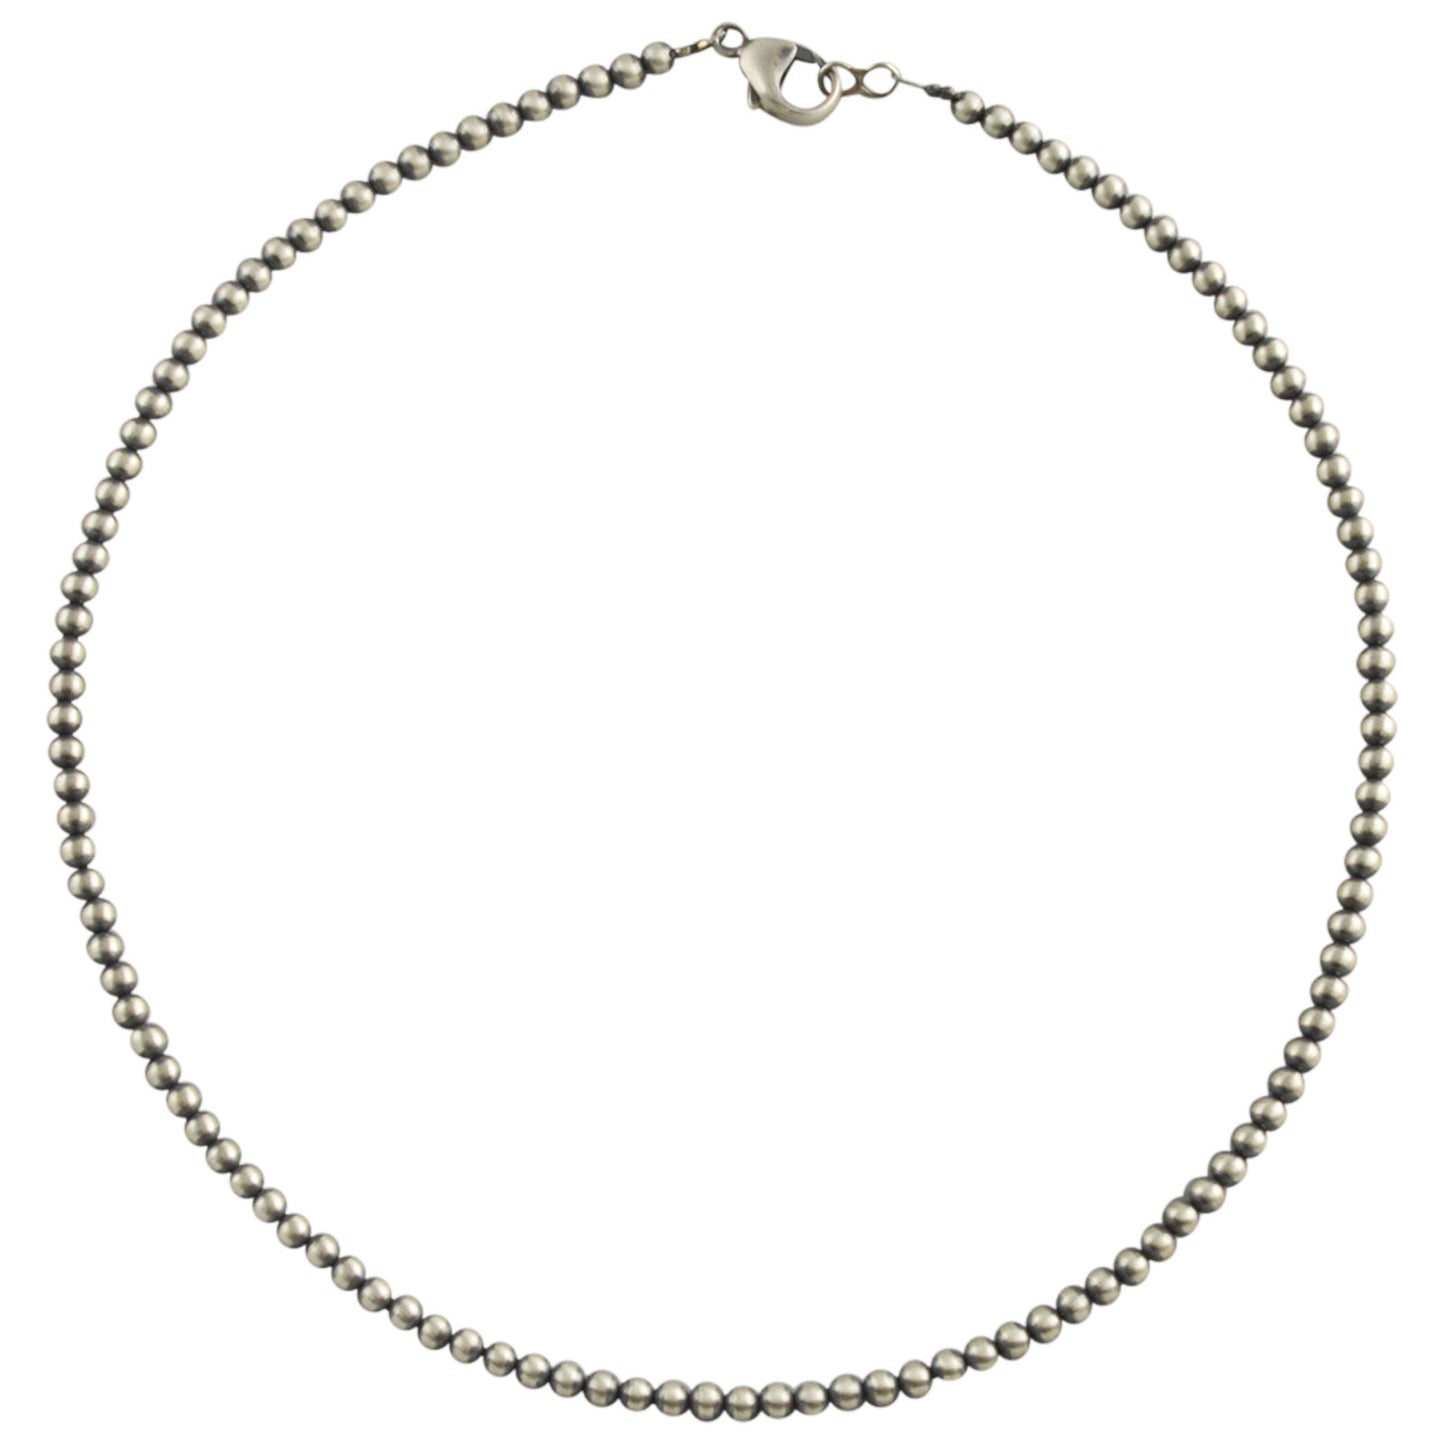 Sterling Silver Navajo Pearl 4mm Oxidize Round Bead Necklace. Available from 14" to 60"